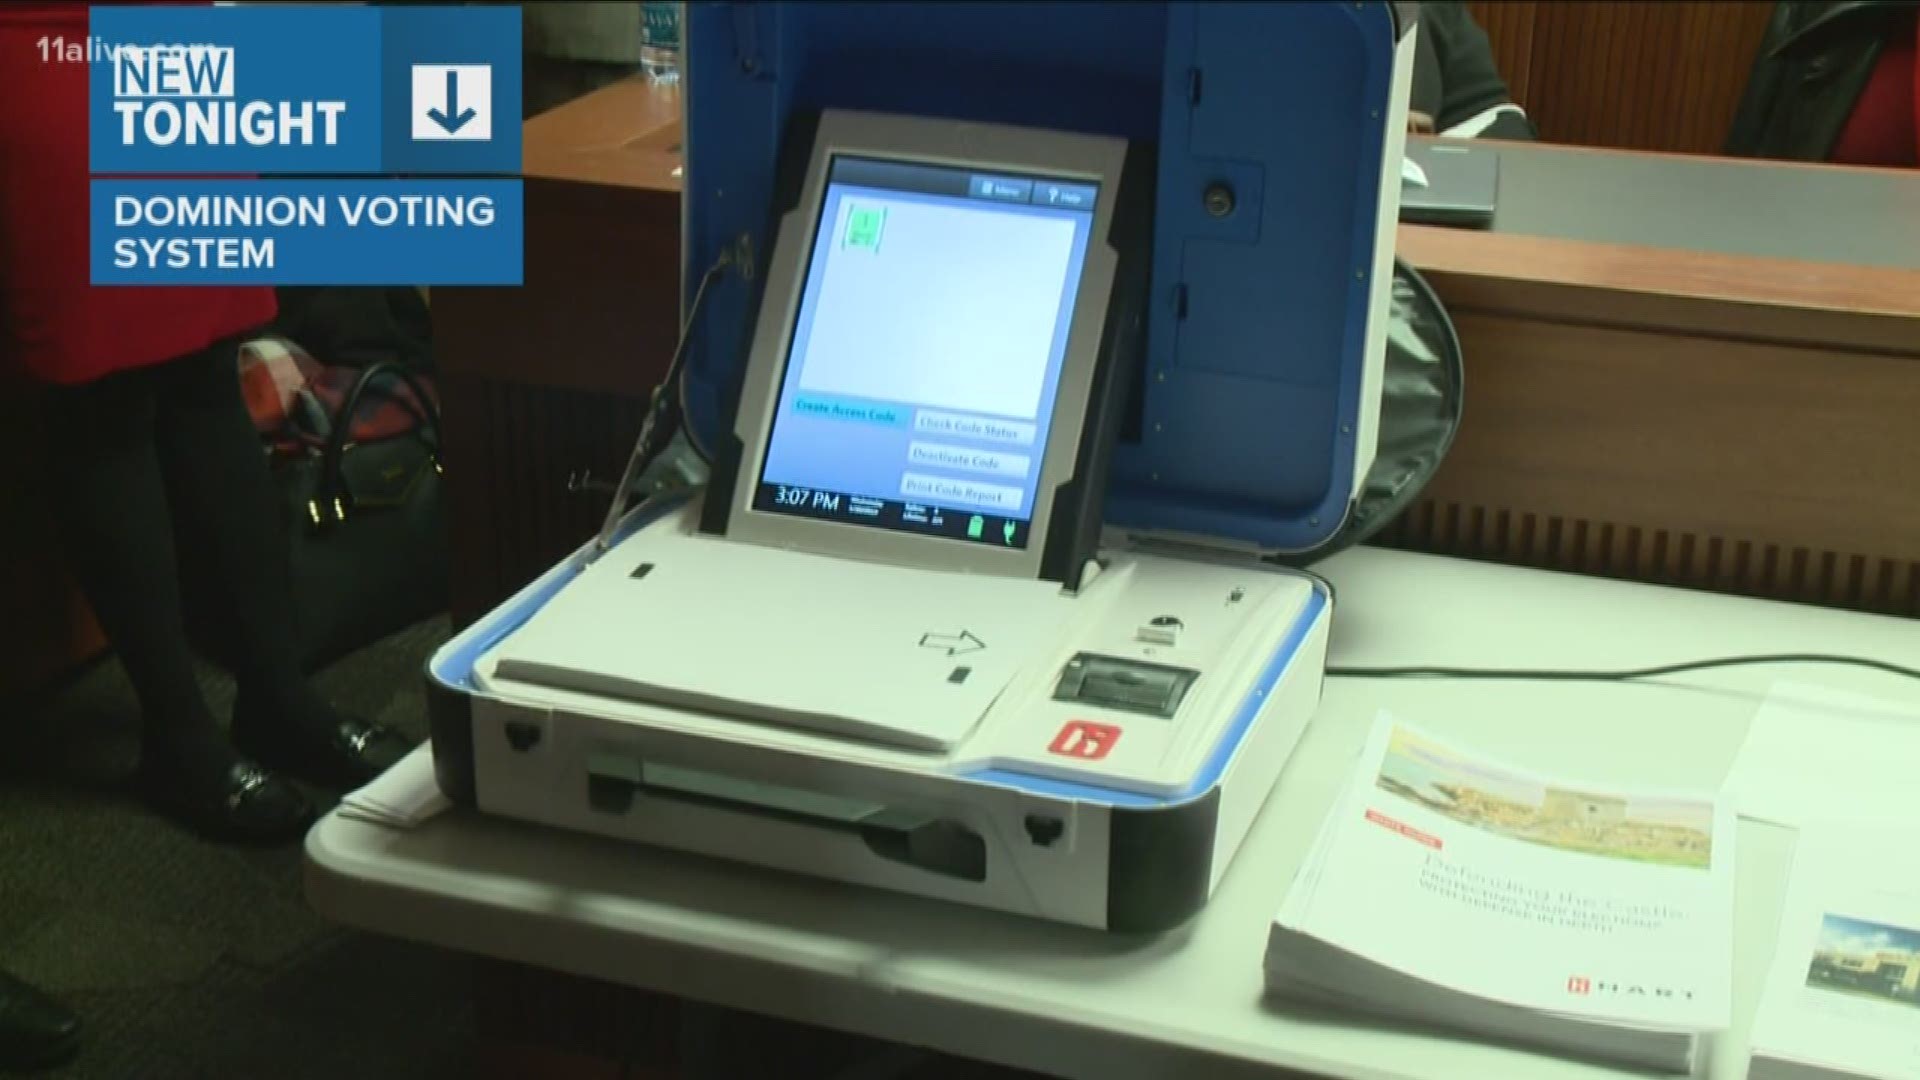 Implementation of the new secure voting system will start immediately and be in place and fully operational for the March 24, 2020 Presidential Preference Primary